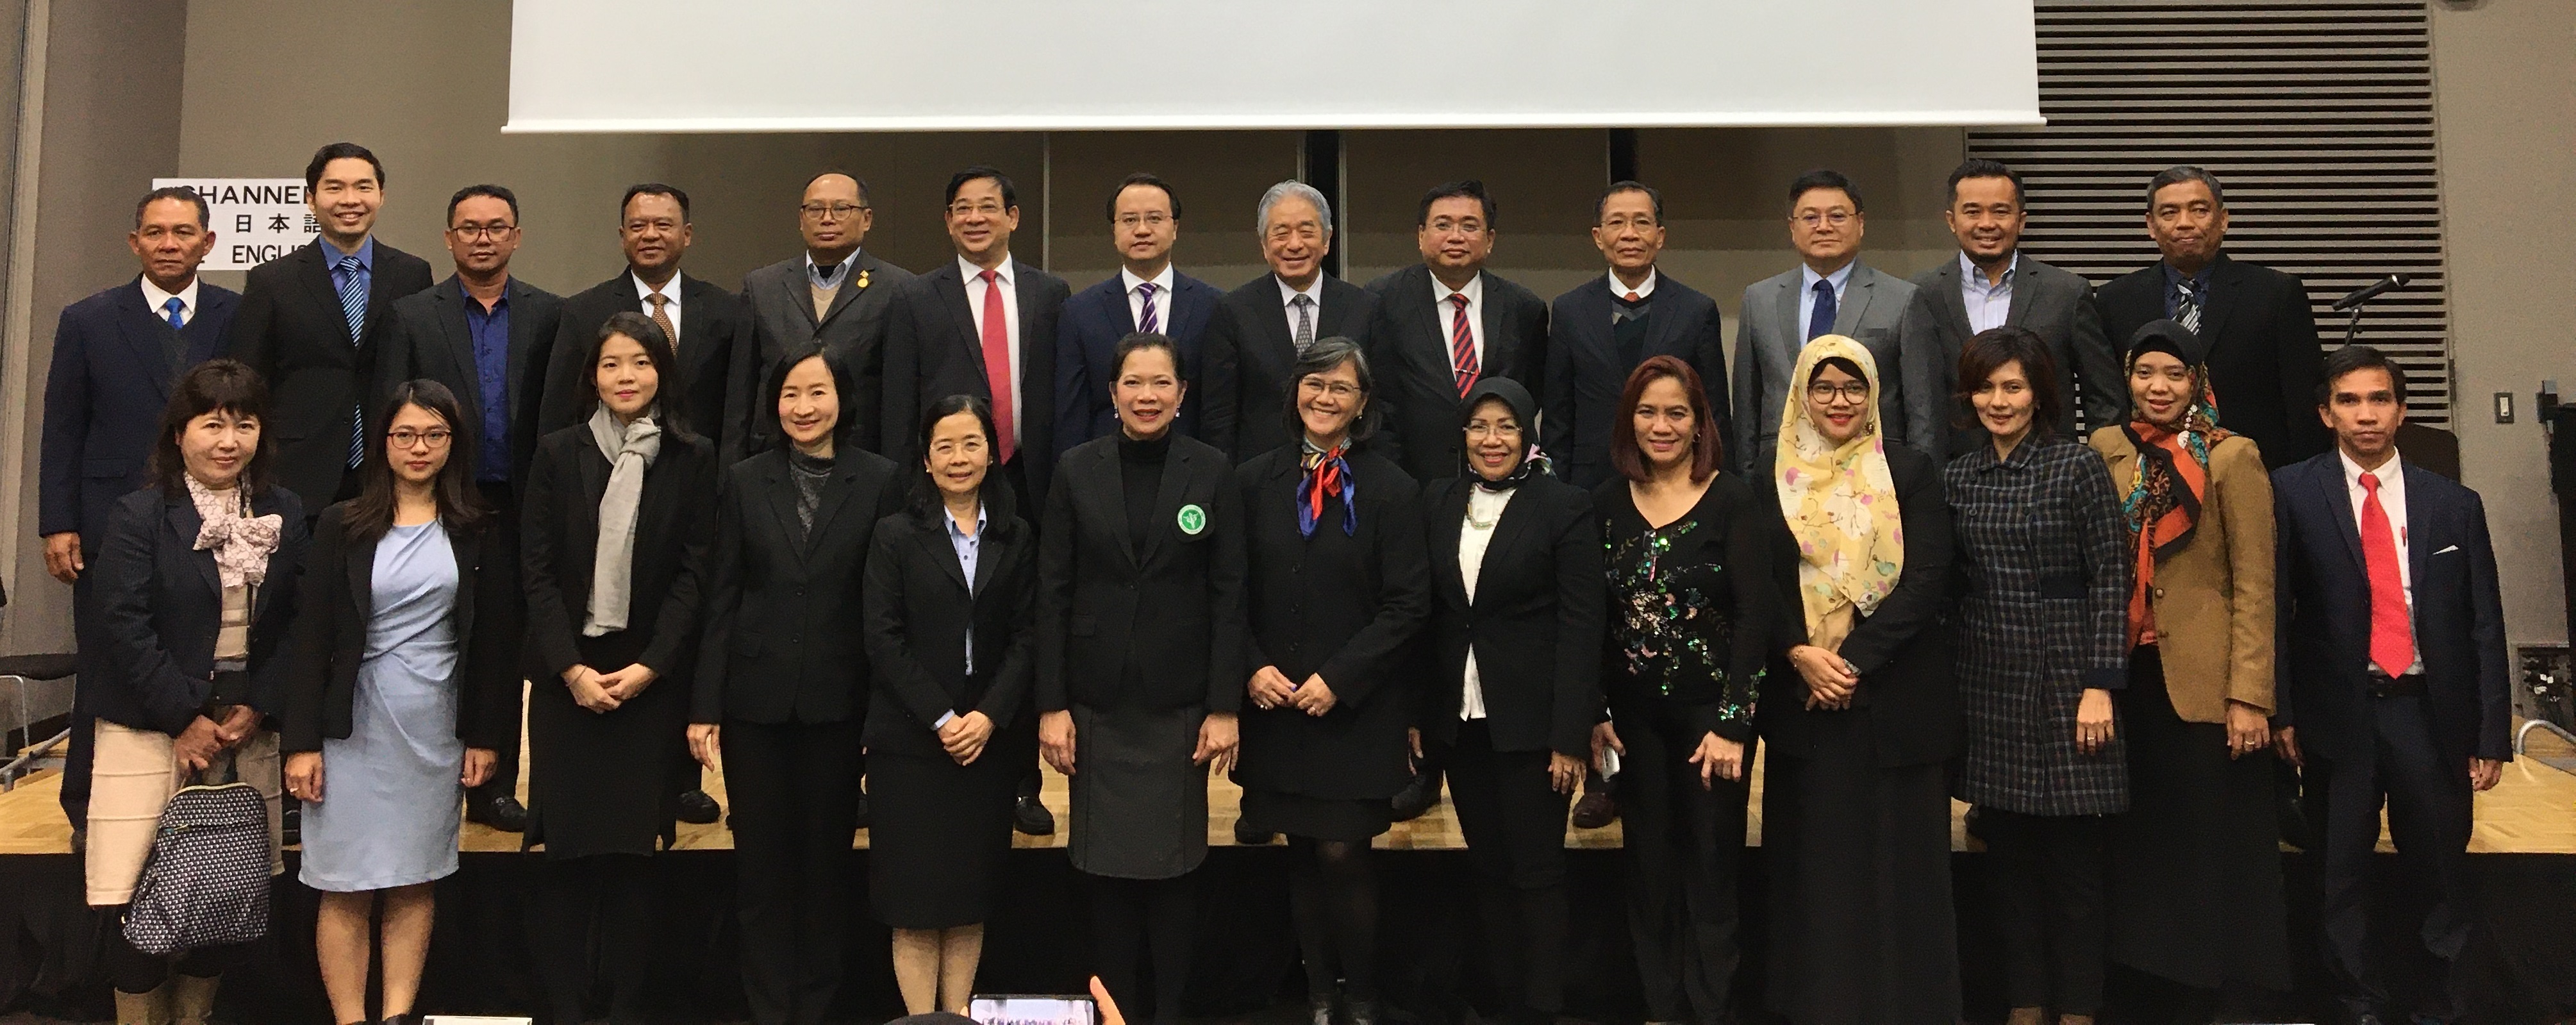 Ajc Organized The Asean Services Trade Forum In Tokyo To Discuss The Emerging Demands For Health And Social Services In Asean And Its Investment Opportunities Business Wire